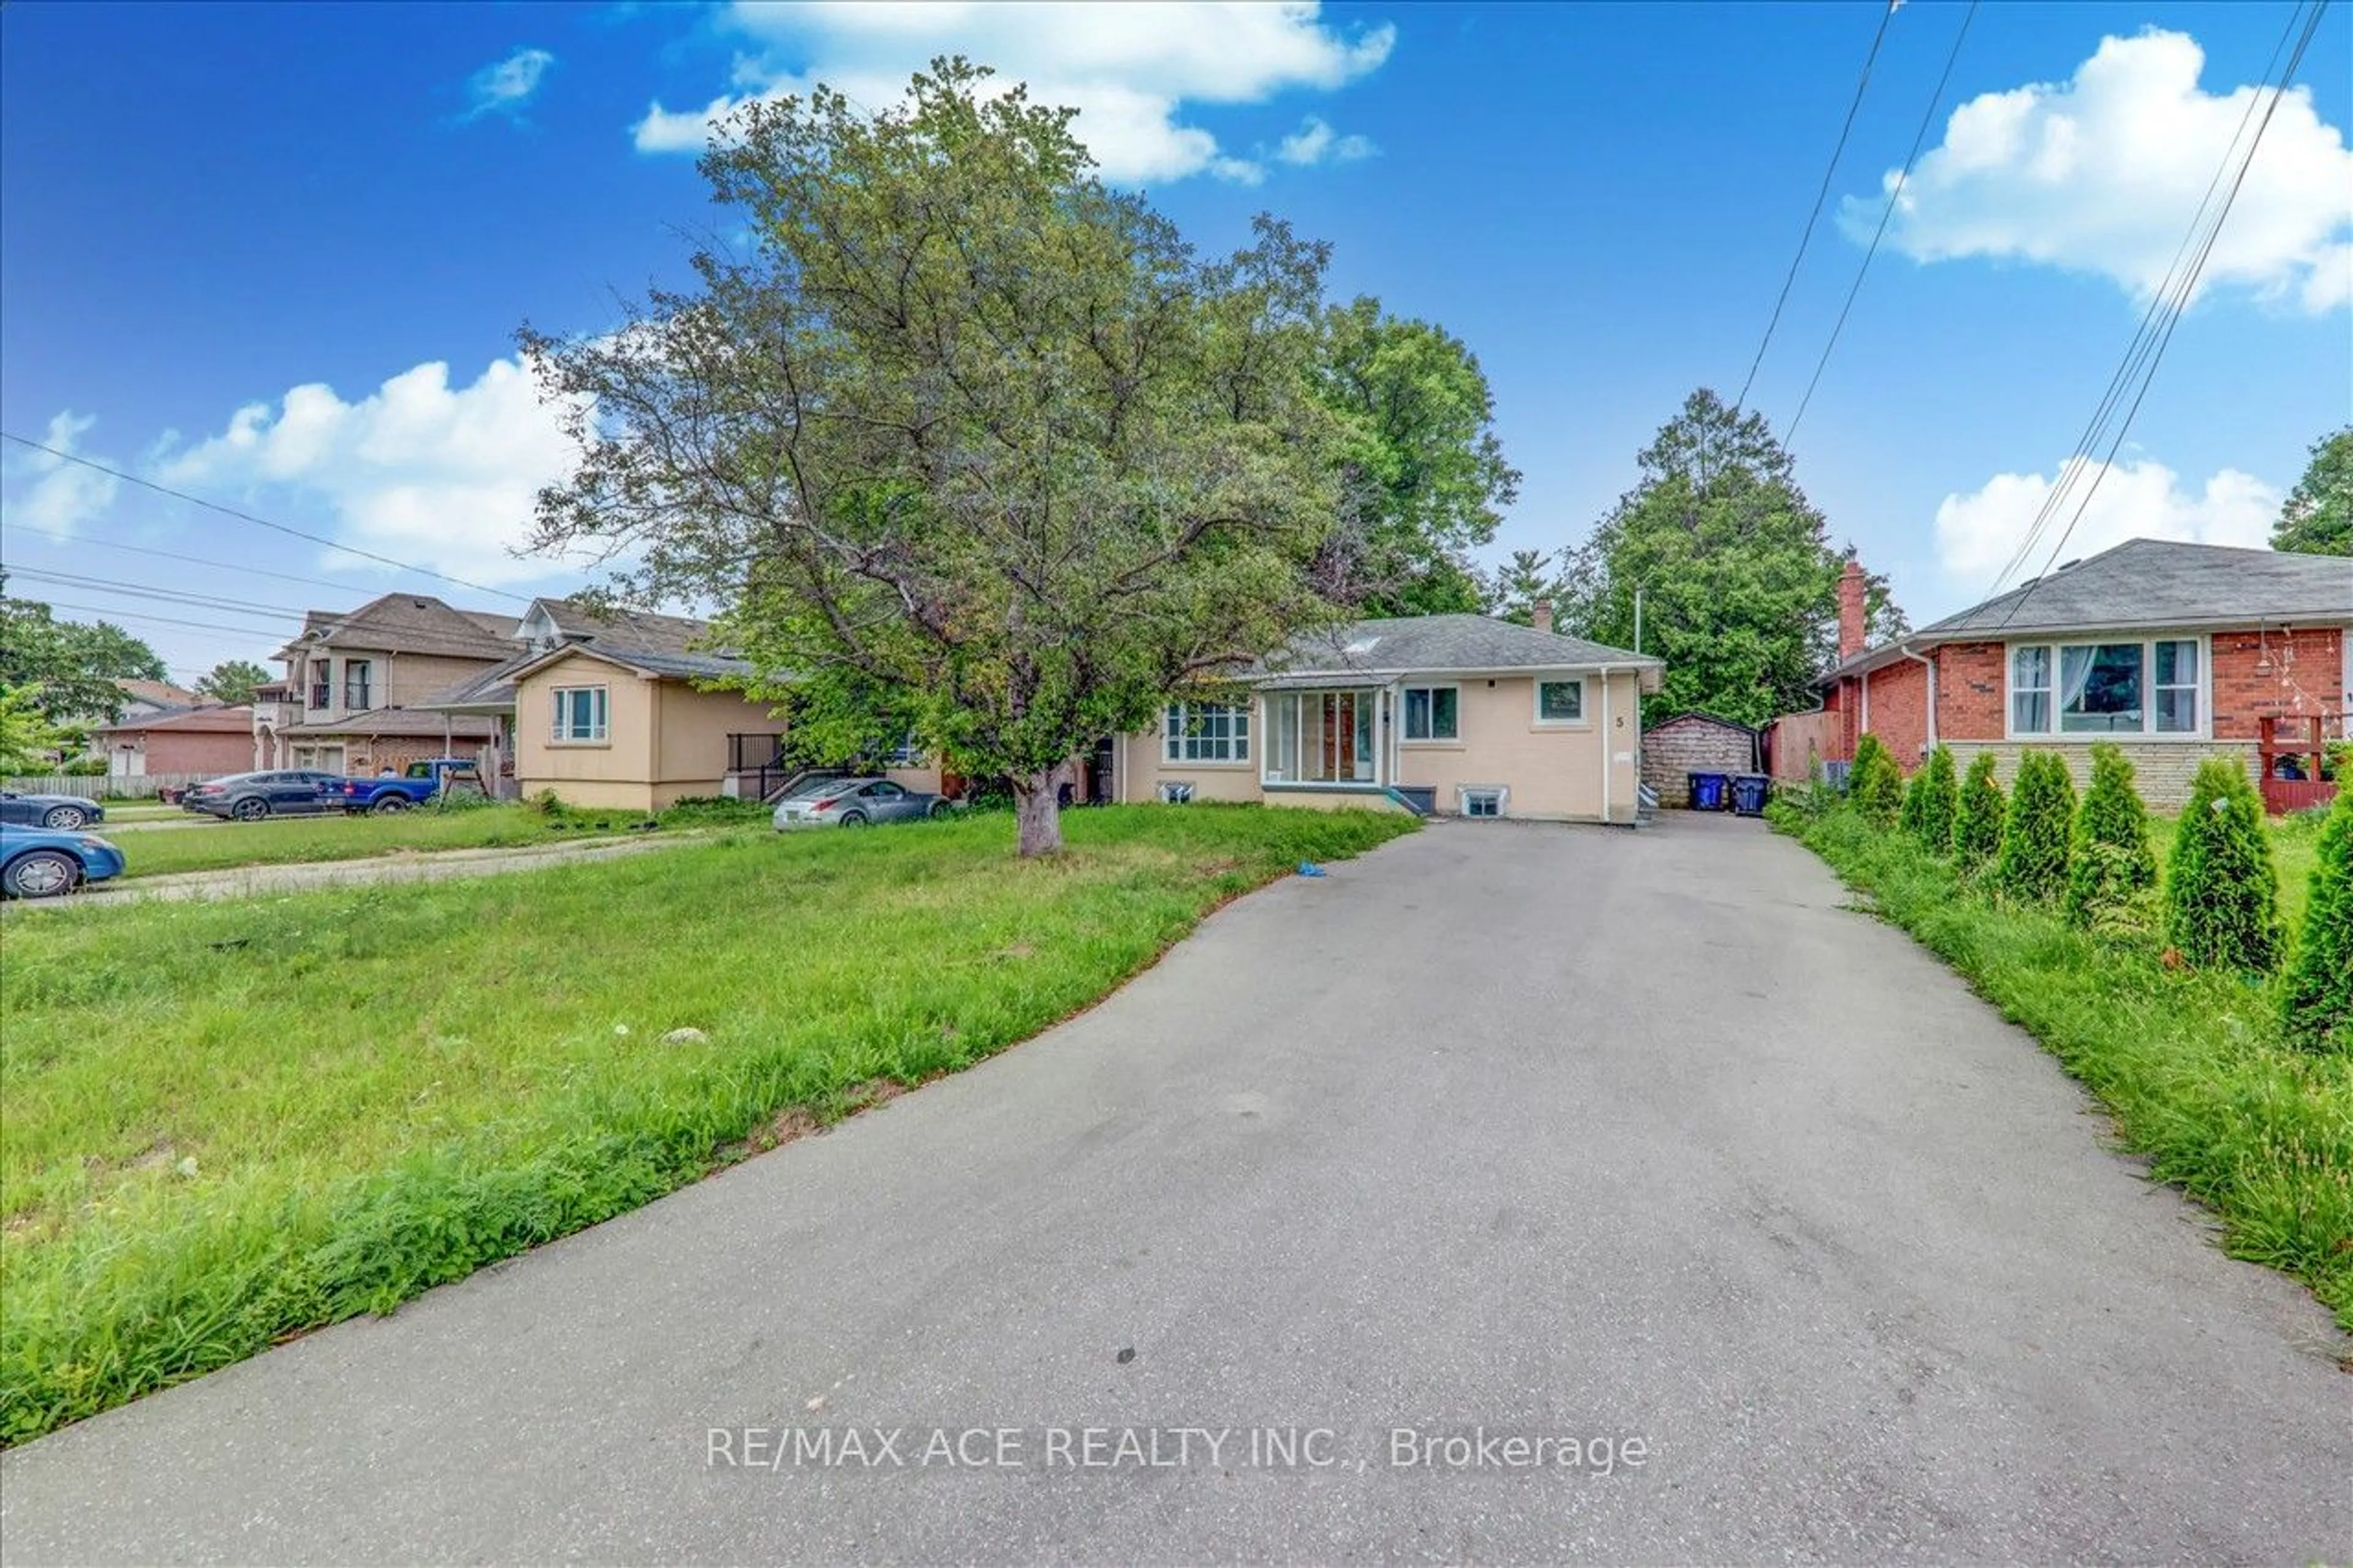 Frontside or backside of a home for 5 Willowlea Dr, Toronto Ontario M1C 1J4